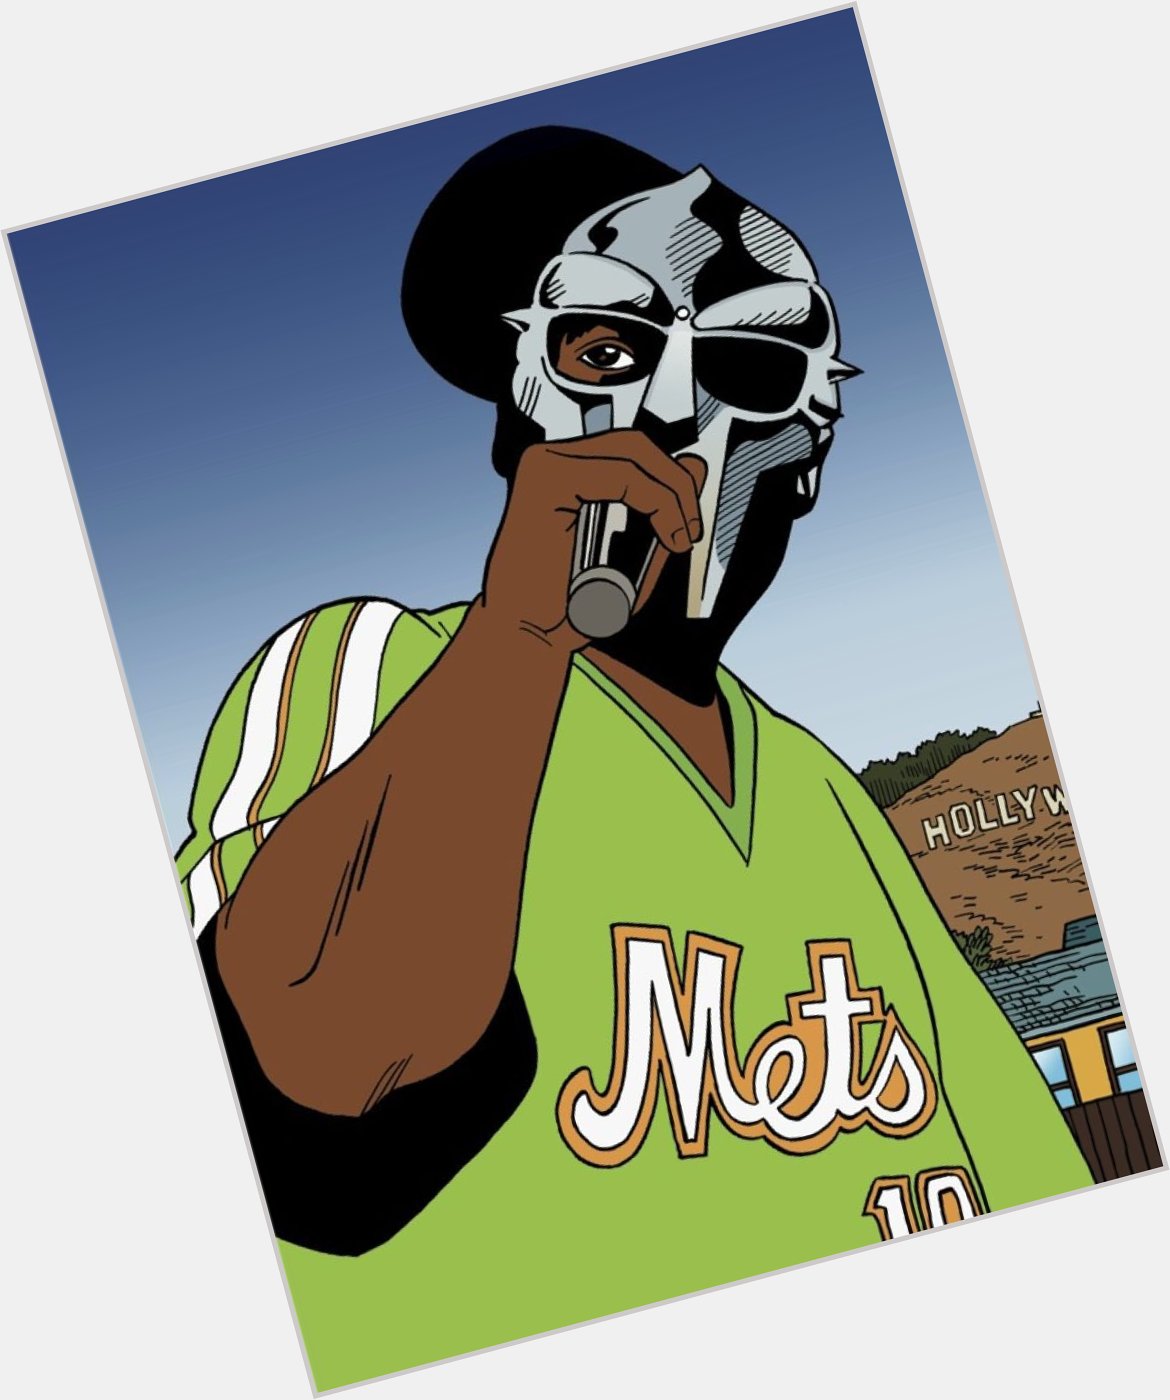  on this day 46 years ago, Happy birthday to MF Doom 